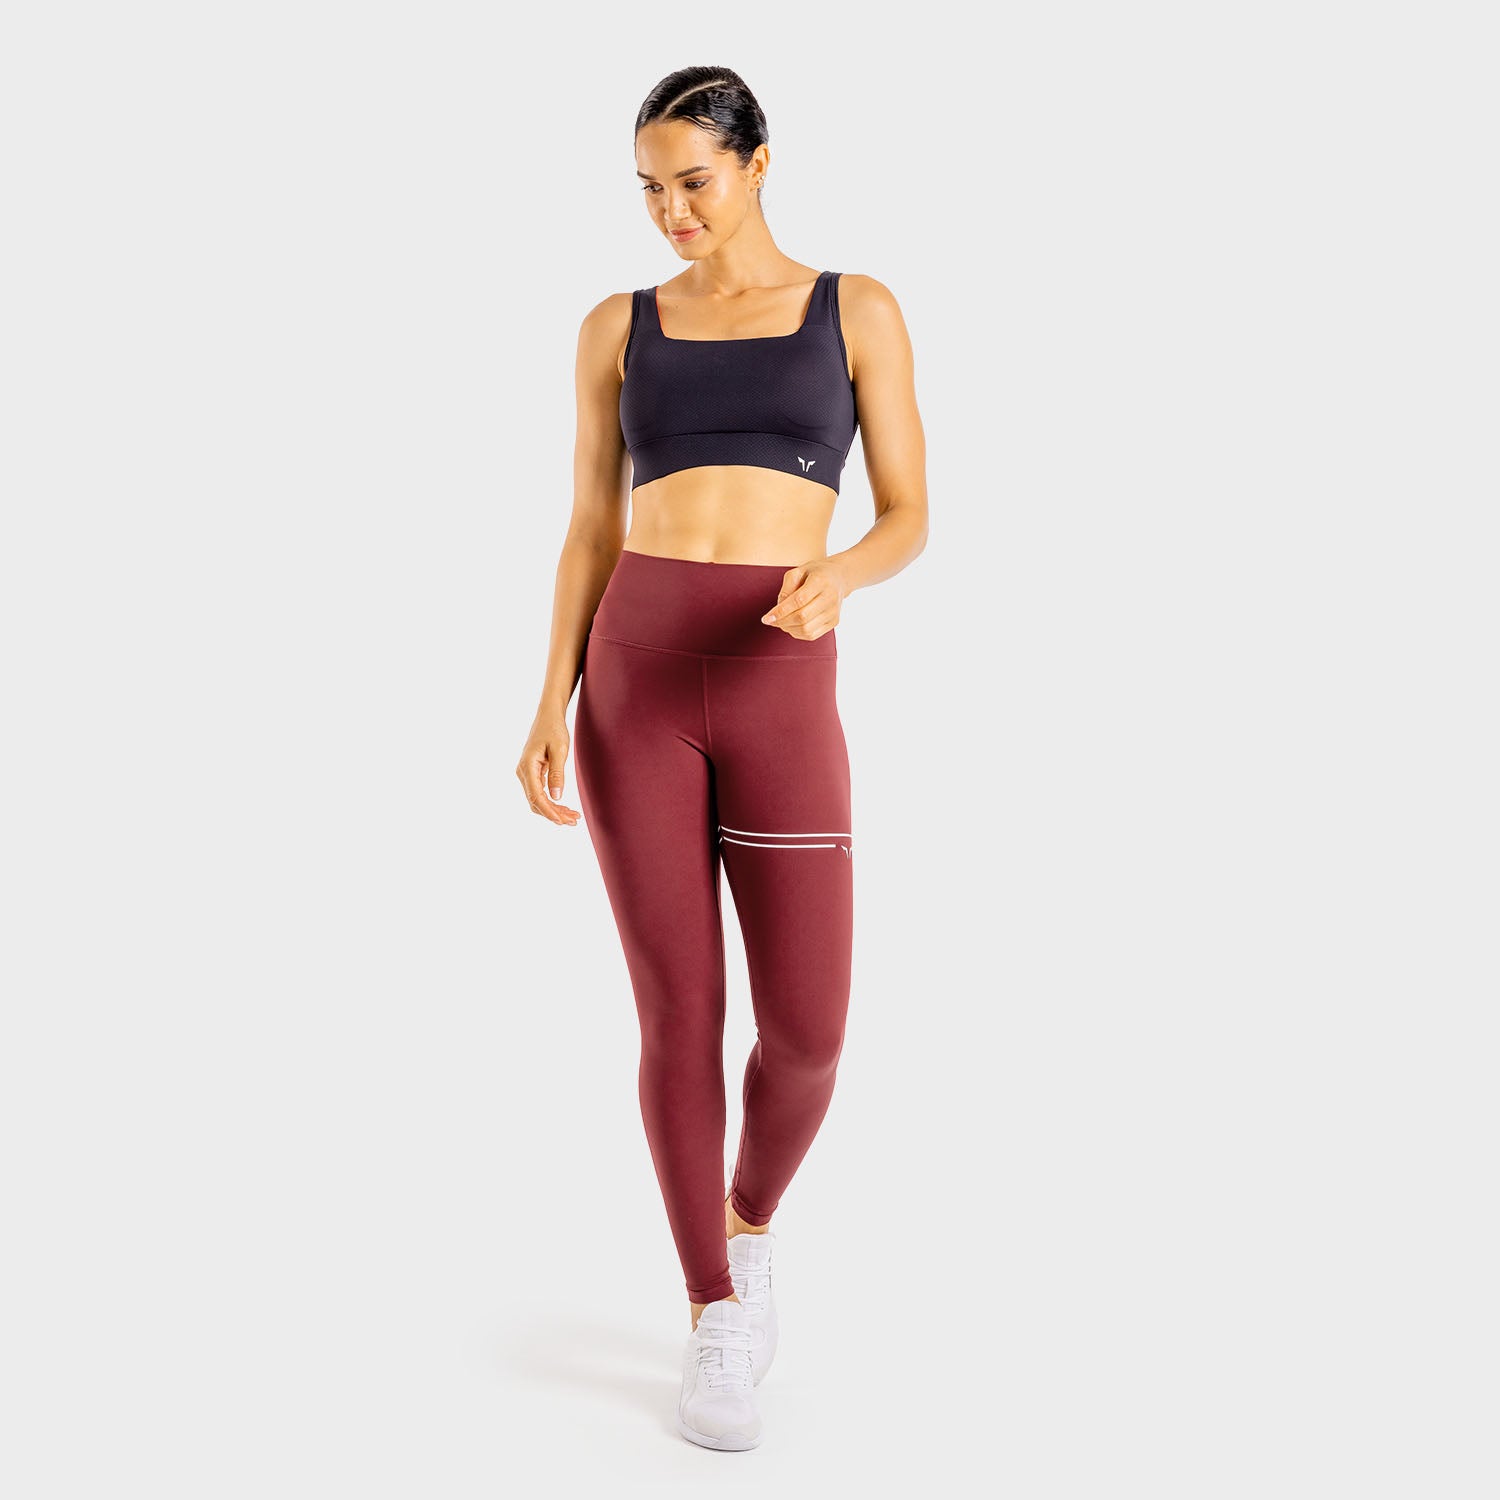 NEW Womens Large Maroon Joggers Athletic Gym Fitness Yoga Pants